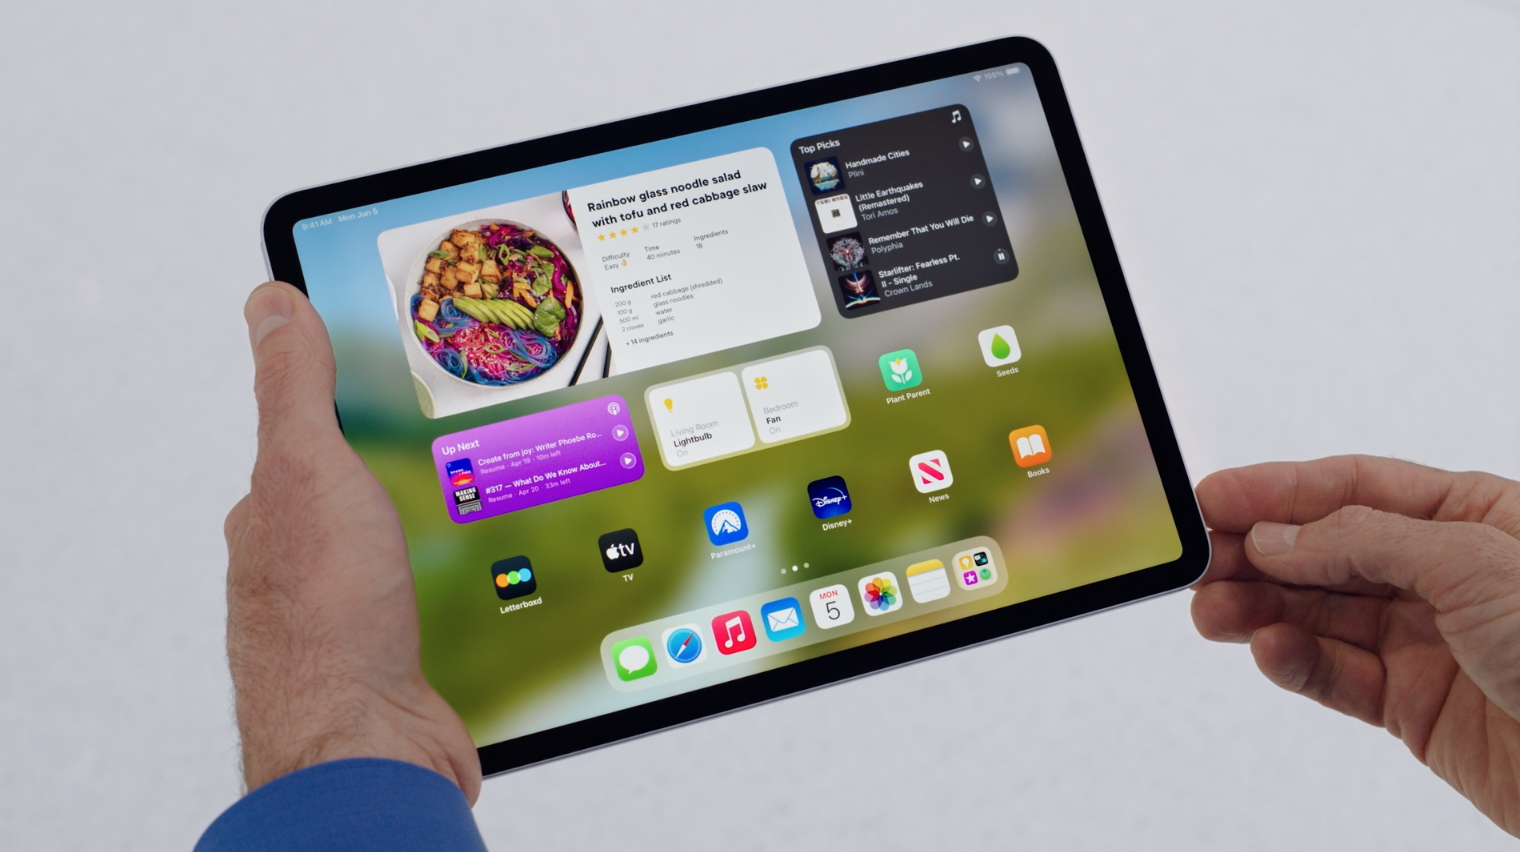 Apple iPad mini launch: Next-gen iPad likely to launch in late 2023 or  early 2024